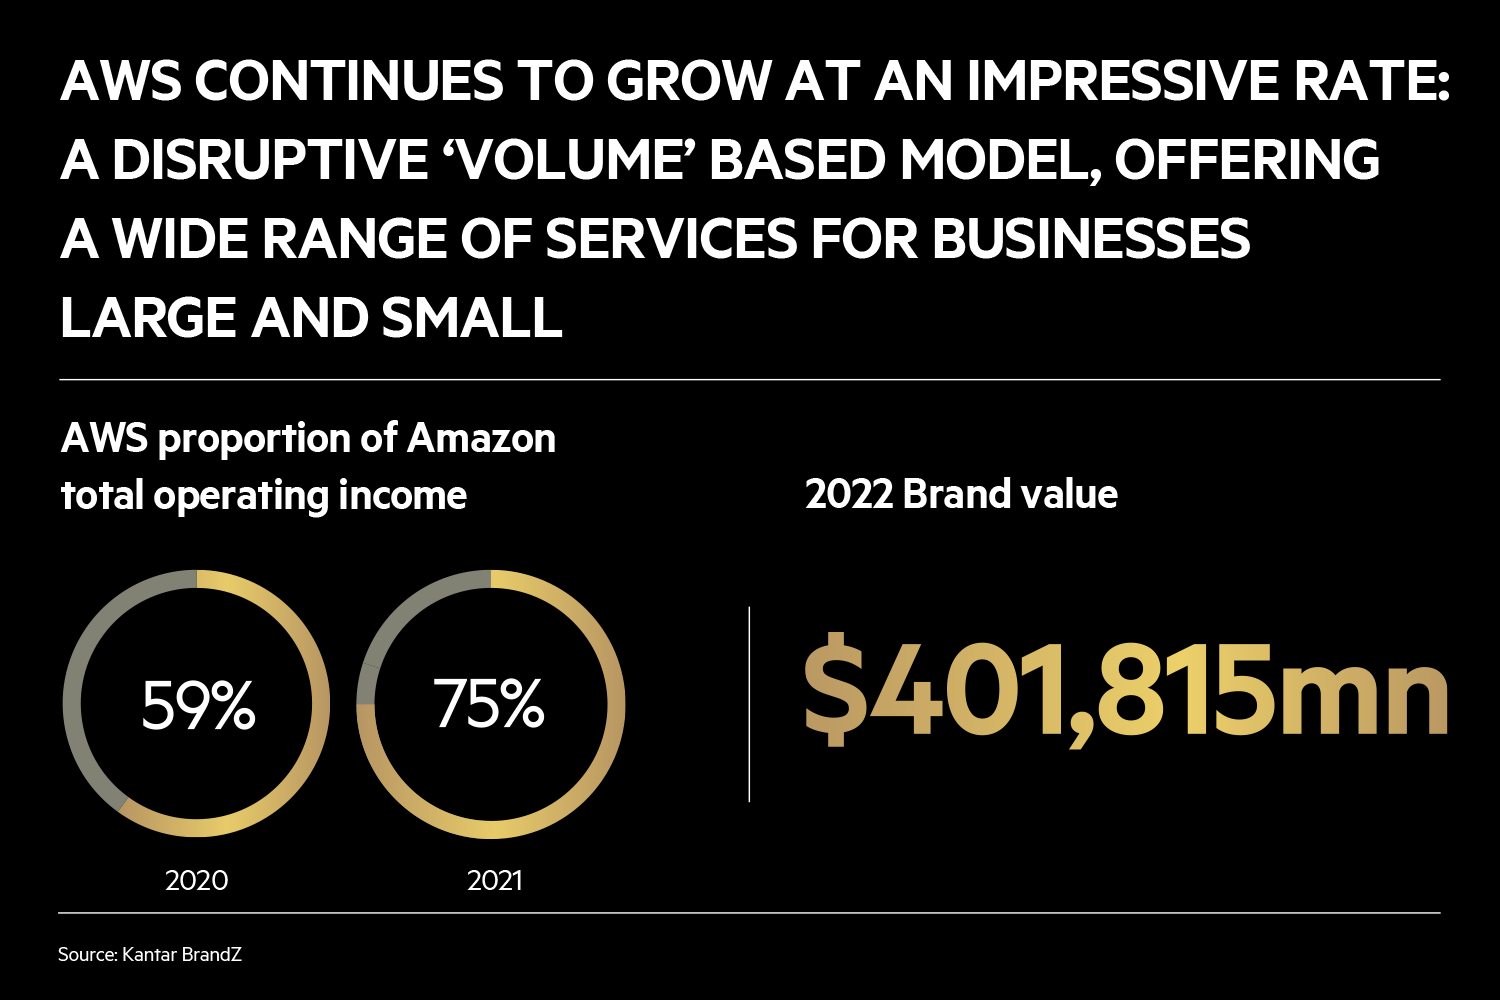 AWS CONTINUES TO GROW AT AN IMPRESSIVE RATE: A DISRUPTIVE ‘VOLUME’ BASED MODEL, OFFERING A WIDE RANGE OF SERVICES FOR BUSINESSES LARGE AND SMALL